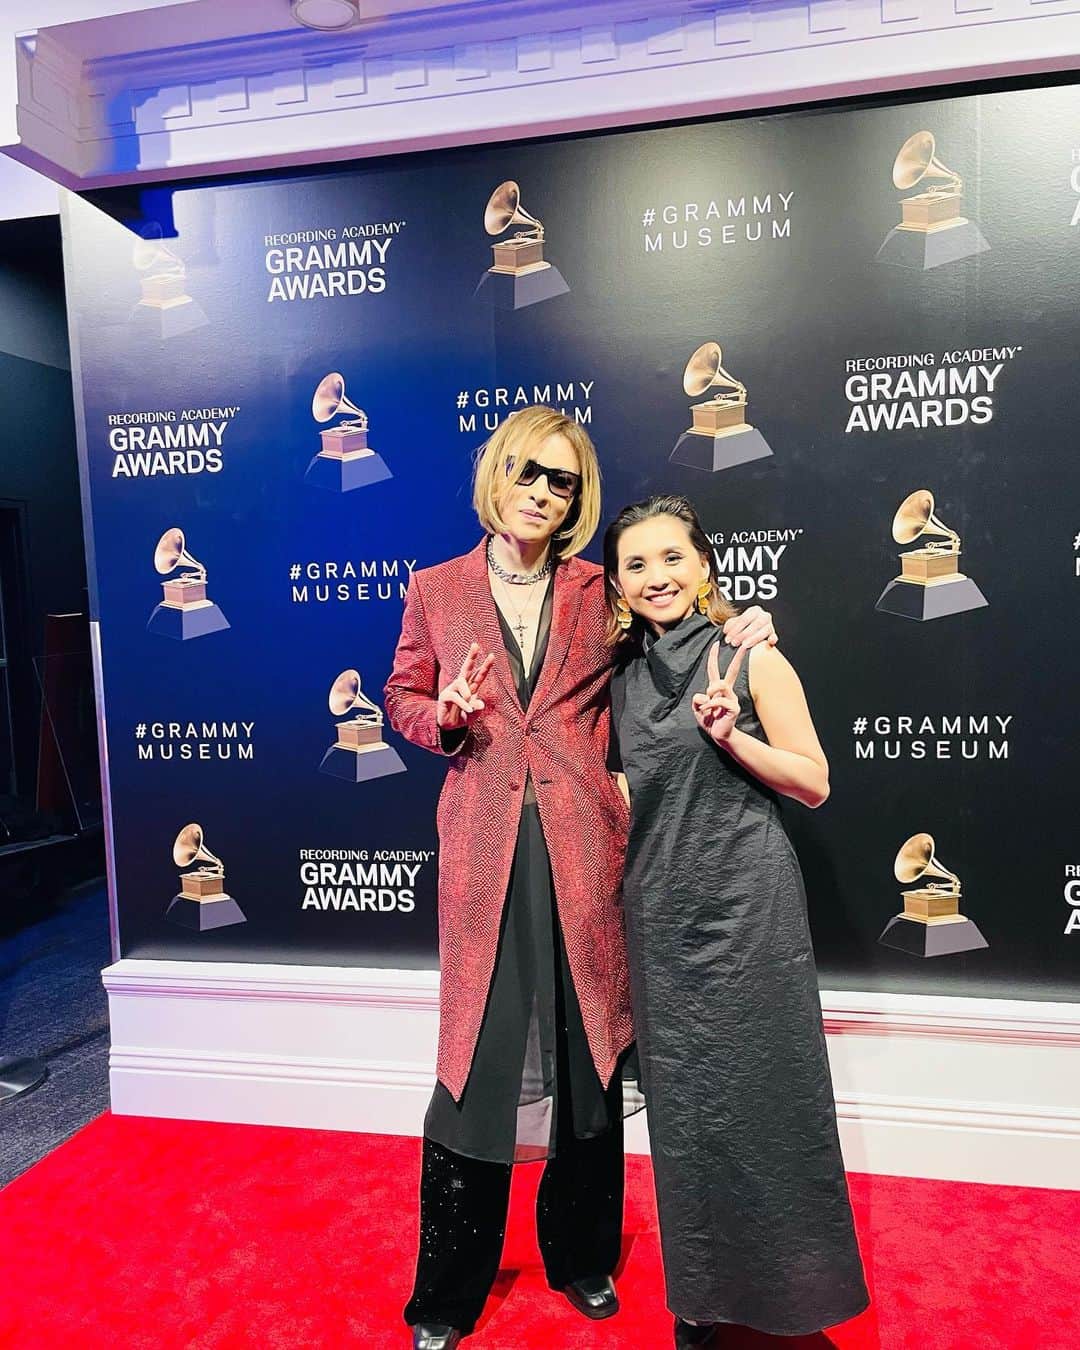 Beverlyのインスタグラム：「YOSHIKIさんのshow @Grammy Museumに出演しました！サプライズゲストだったので先に言えなくてごめんね！😭久しぶりにLAに行けて、こんな素敵なステージで歌えて心が幸せでした☺️ I’m living the dream! @yoshikiofficial さんありがとうございます！  YOSHIKI show at Grammy Museum! I was a surprise guest so I wasn’t able to tell you guys! But I had a blast. After how many years I’m back in LA not to compete but to have a show! I’m living the dream. ☺️ Thank you Yoshiki for this opportunity!」